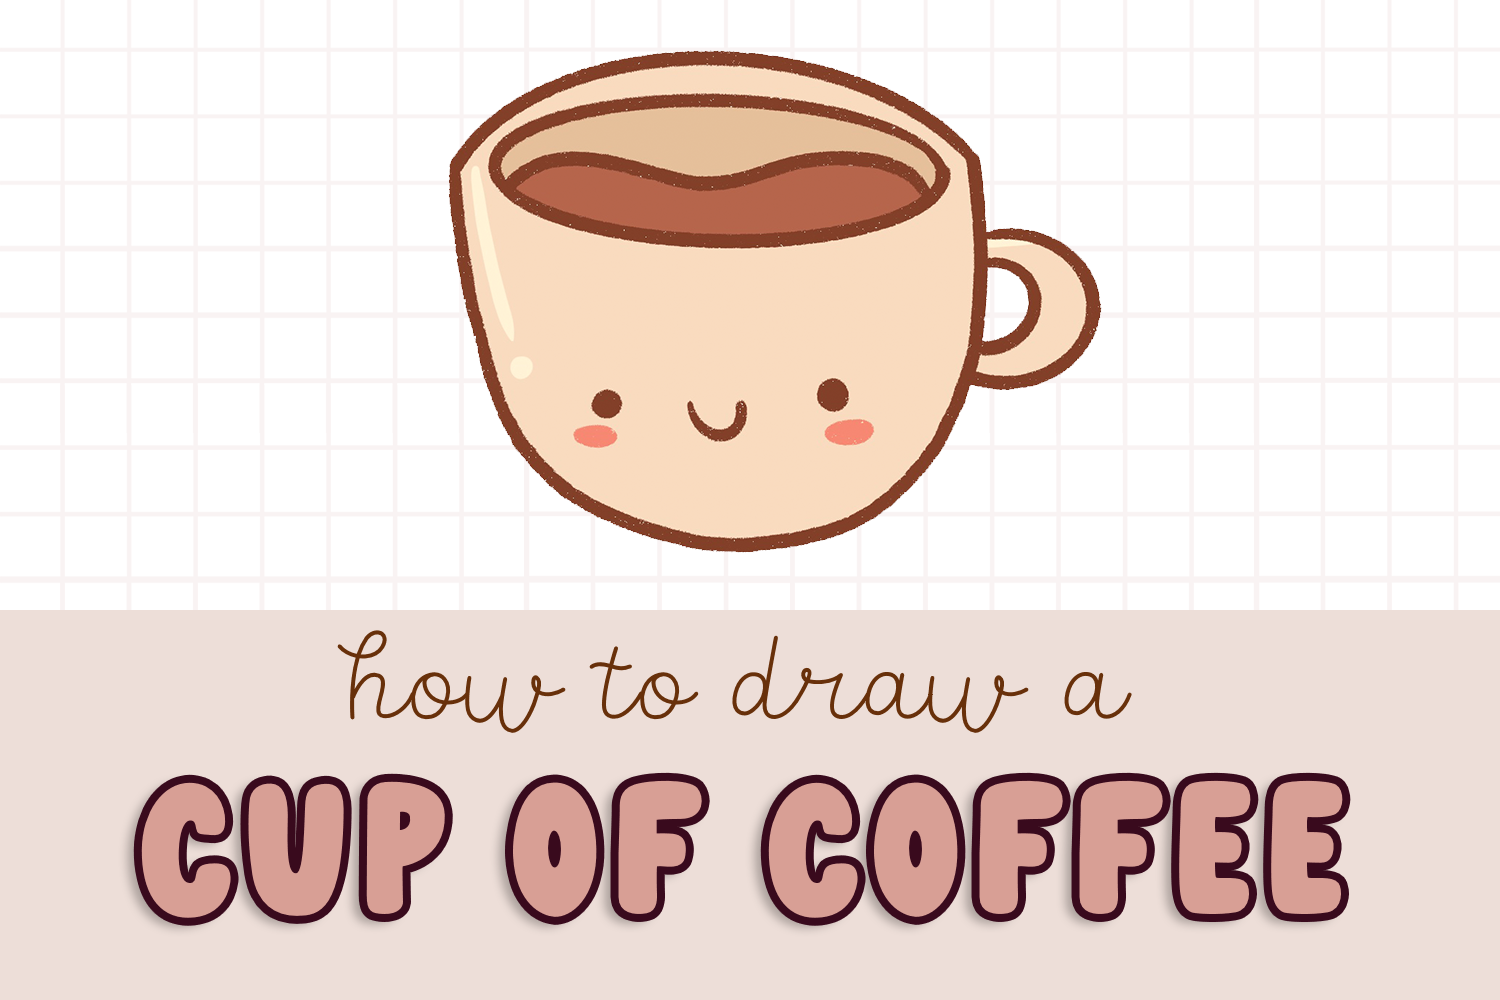 https://drawcartoonstyle.com/wp-content/uploads/2022/09/how-to-draw-a-kawaii-cute-coffee-cup-step-by-step.png